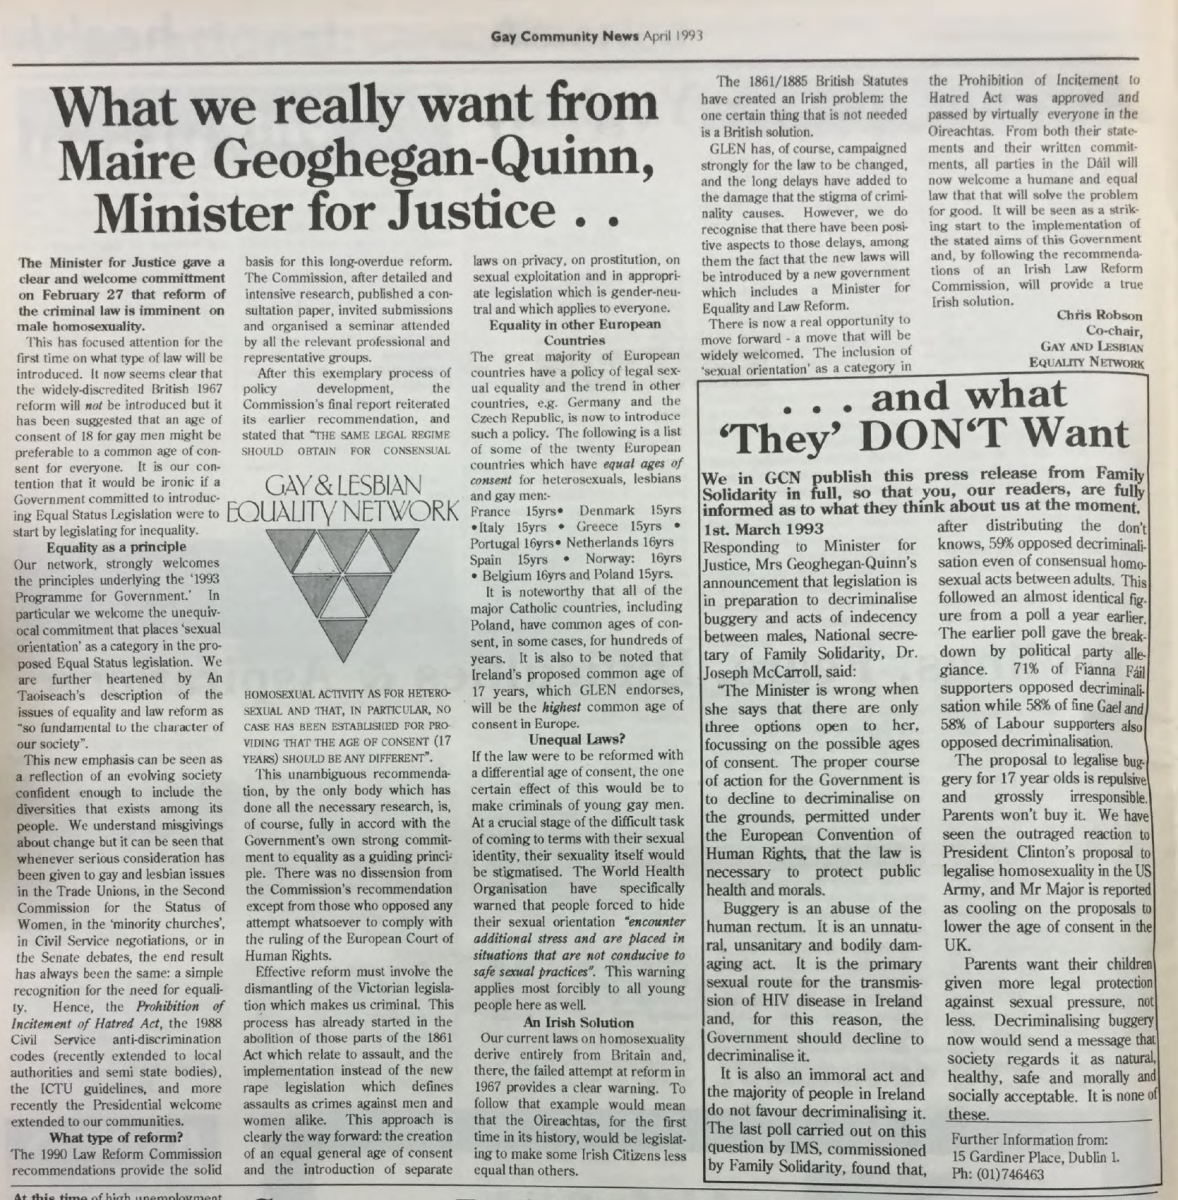 "What we really want from Maire Geoghegan-Quinn, MInister for Justice ... and what 'They' DON'T want", from Gay Community News, No. 50. April 1993.